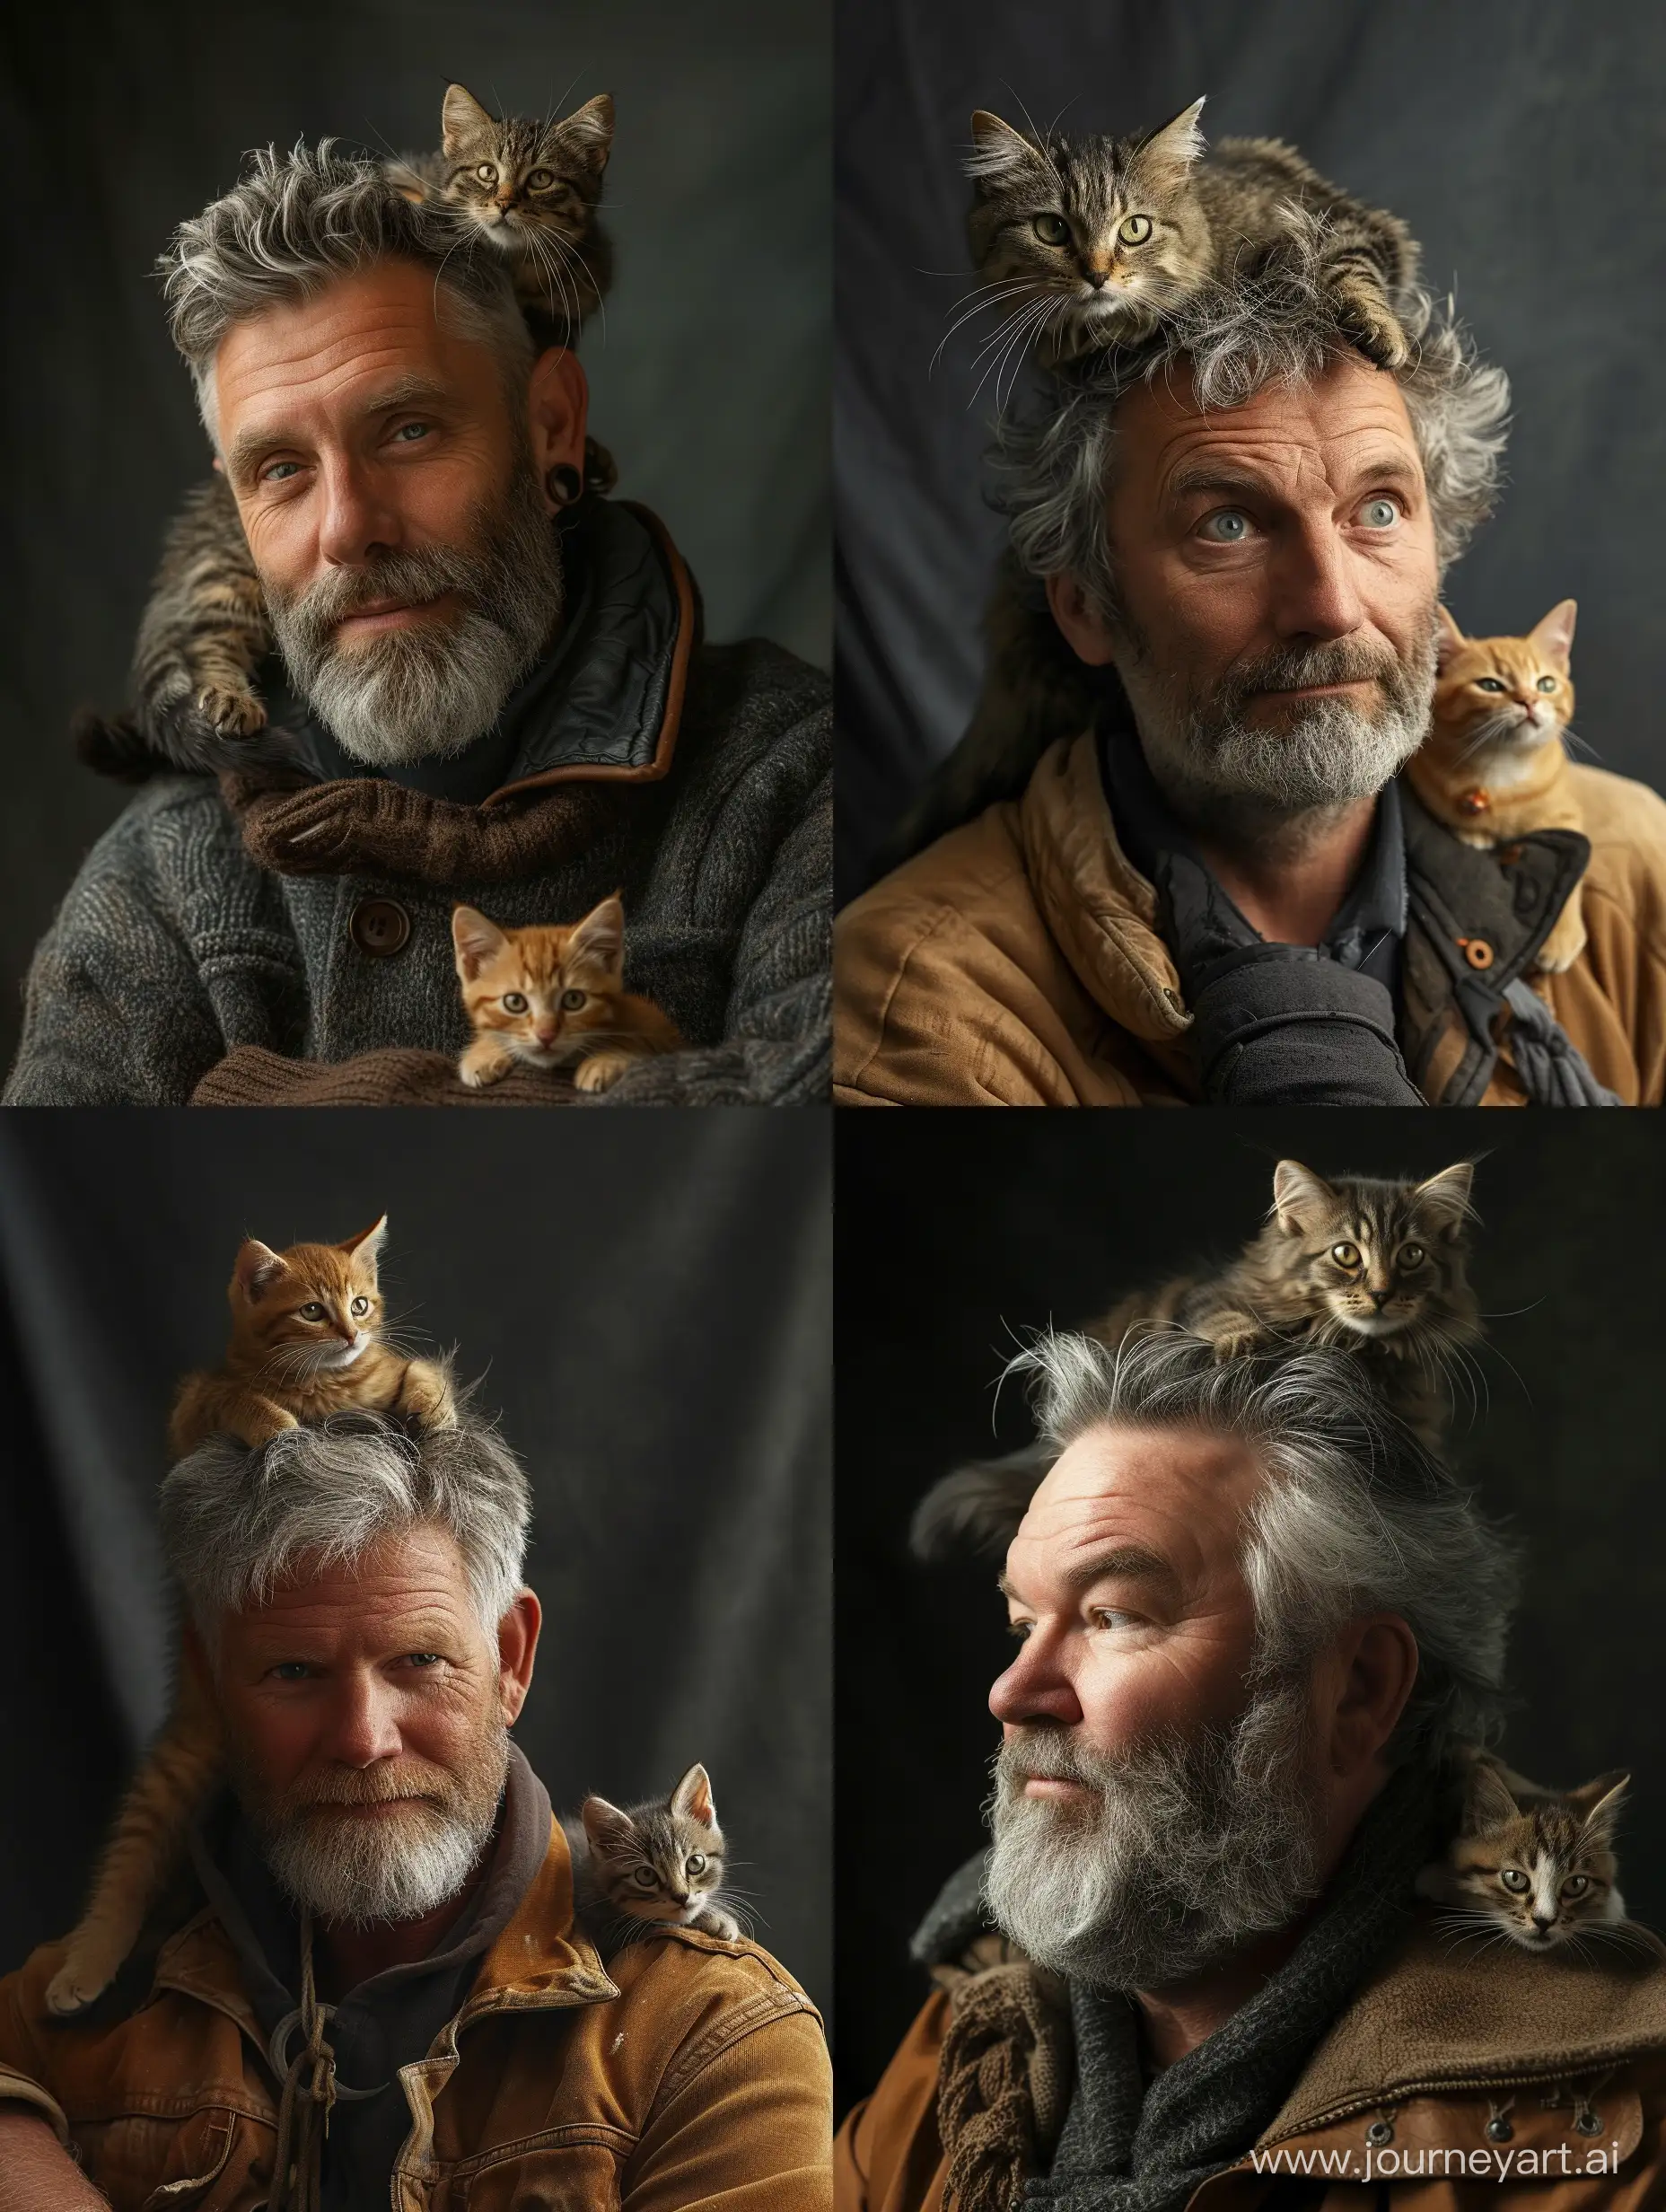 a man 40 year, with a cat on his shoulders, by Alison Geissler, pixabay contest winner, photorealism, gray hair and beard, studio photo portrait, with small cat on lap, robin williams